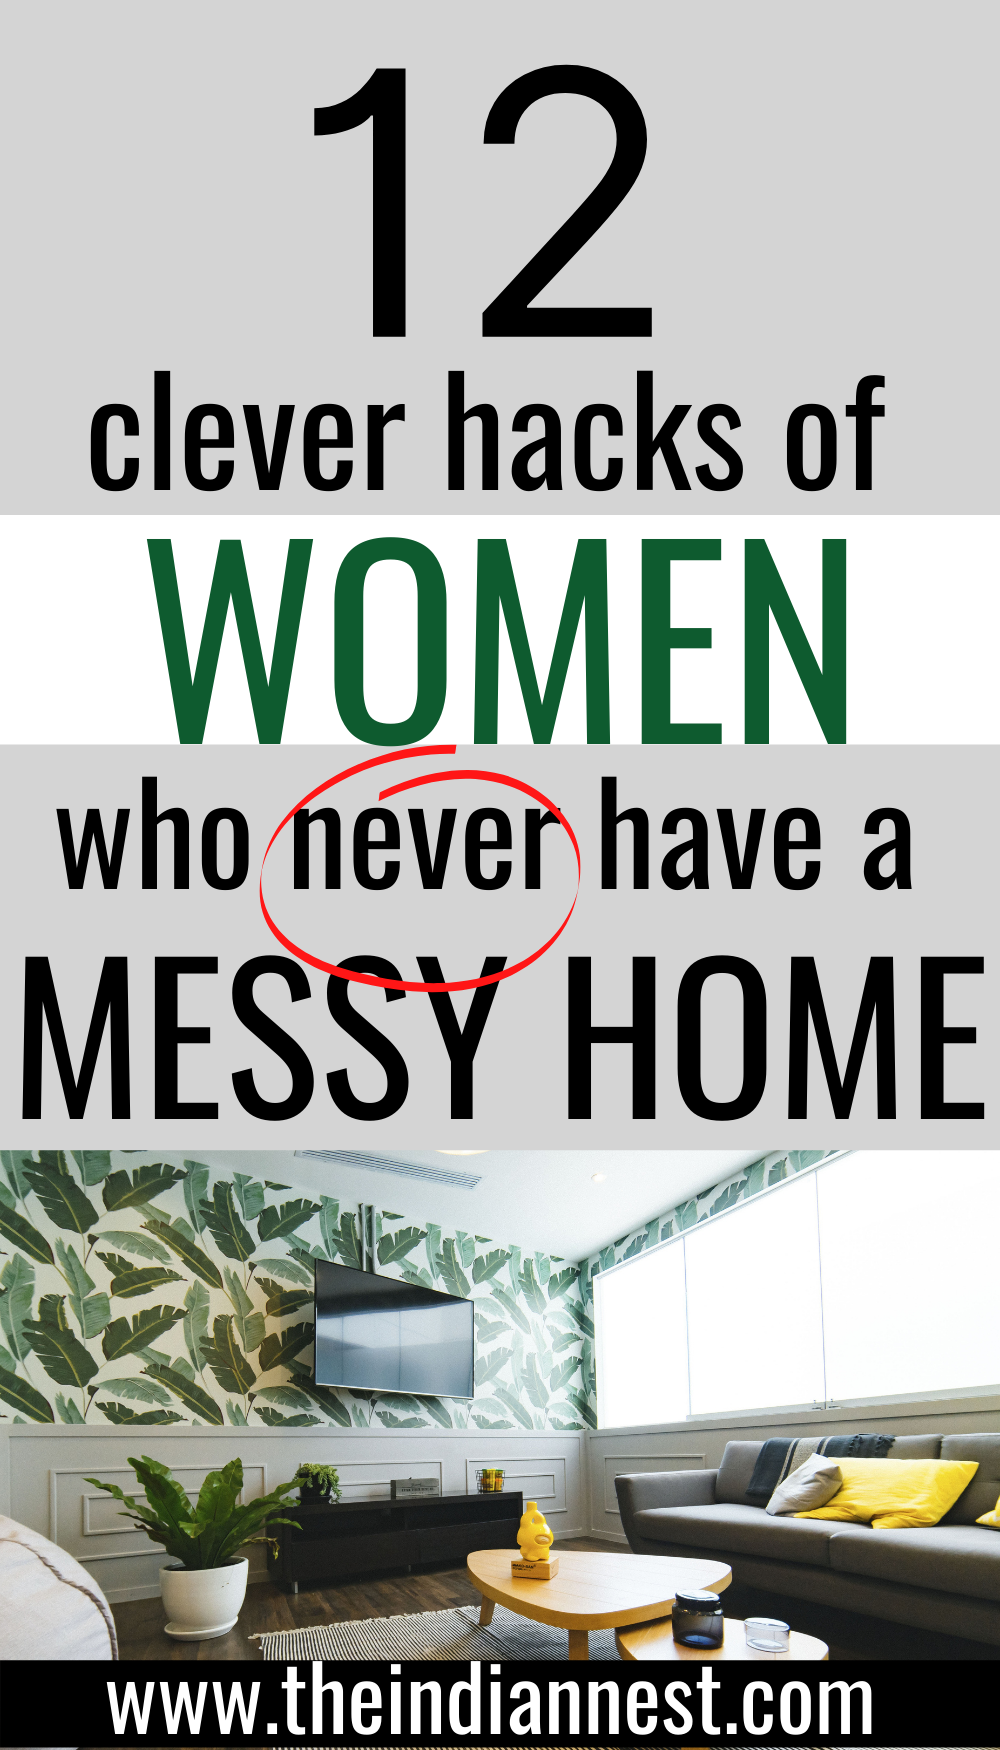  cleaning hacks of women who never have messy home.